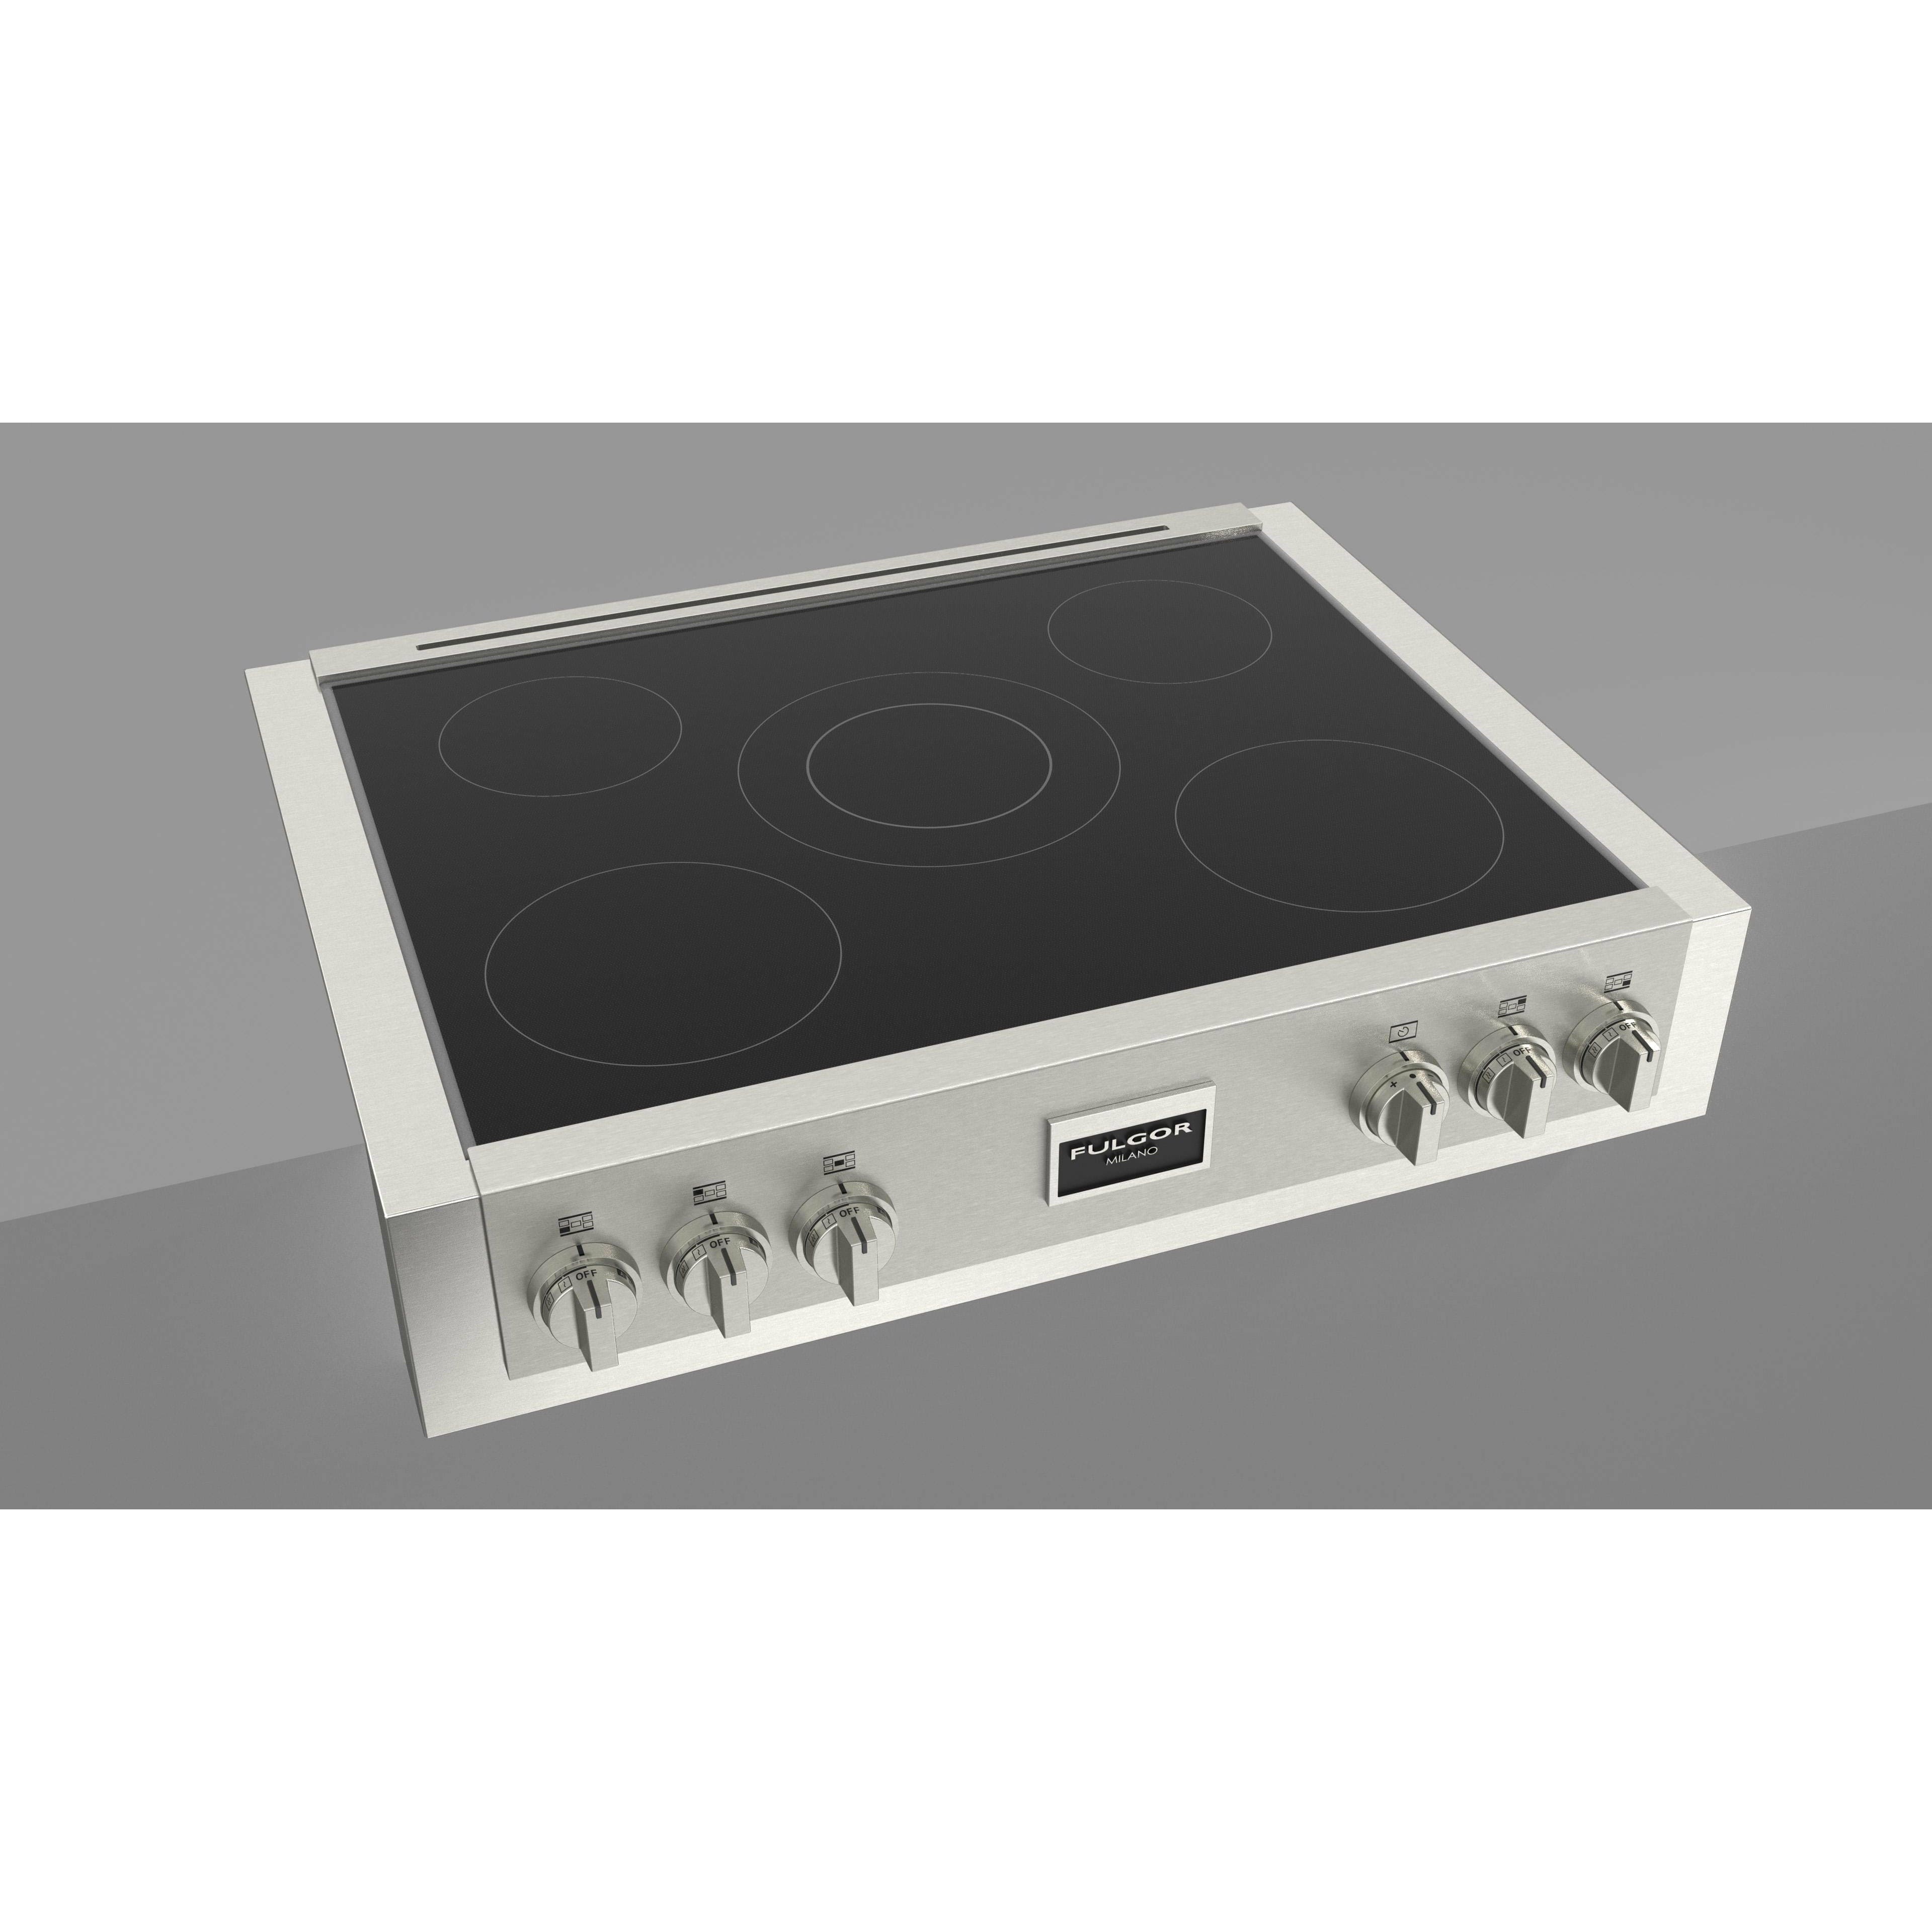 Fulgor Milano 36" Induction Rangetop with 5 Cooking Zones, Stainless Steel - F6IRT365S1 Rangetop F6IRT365S1 Luxury Appliances Direct